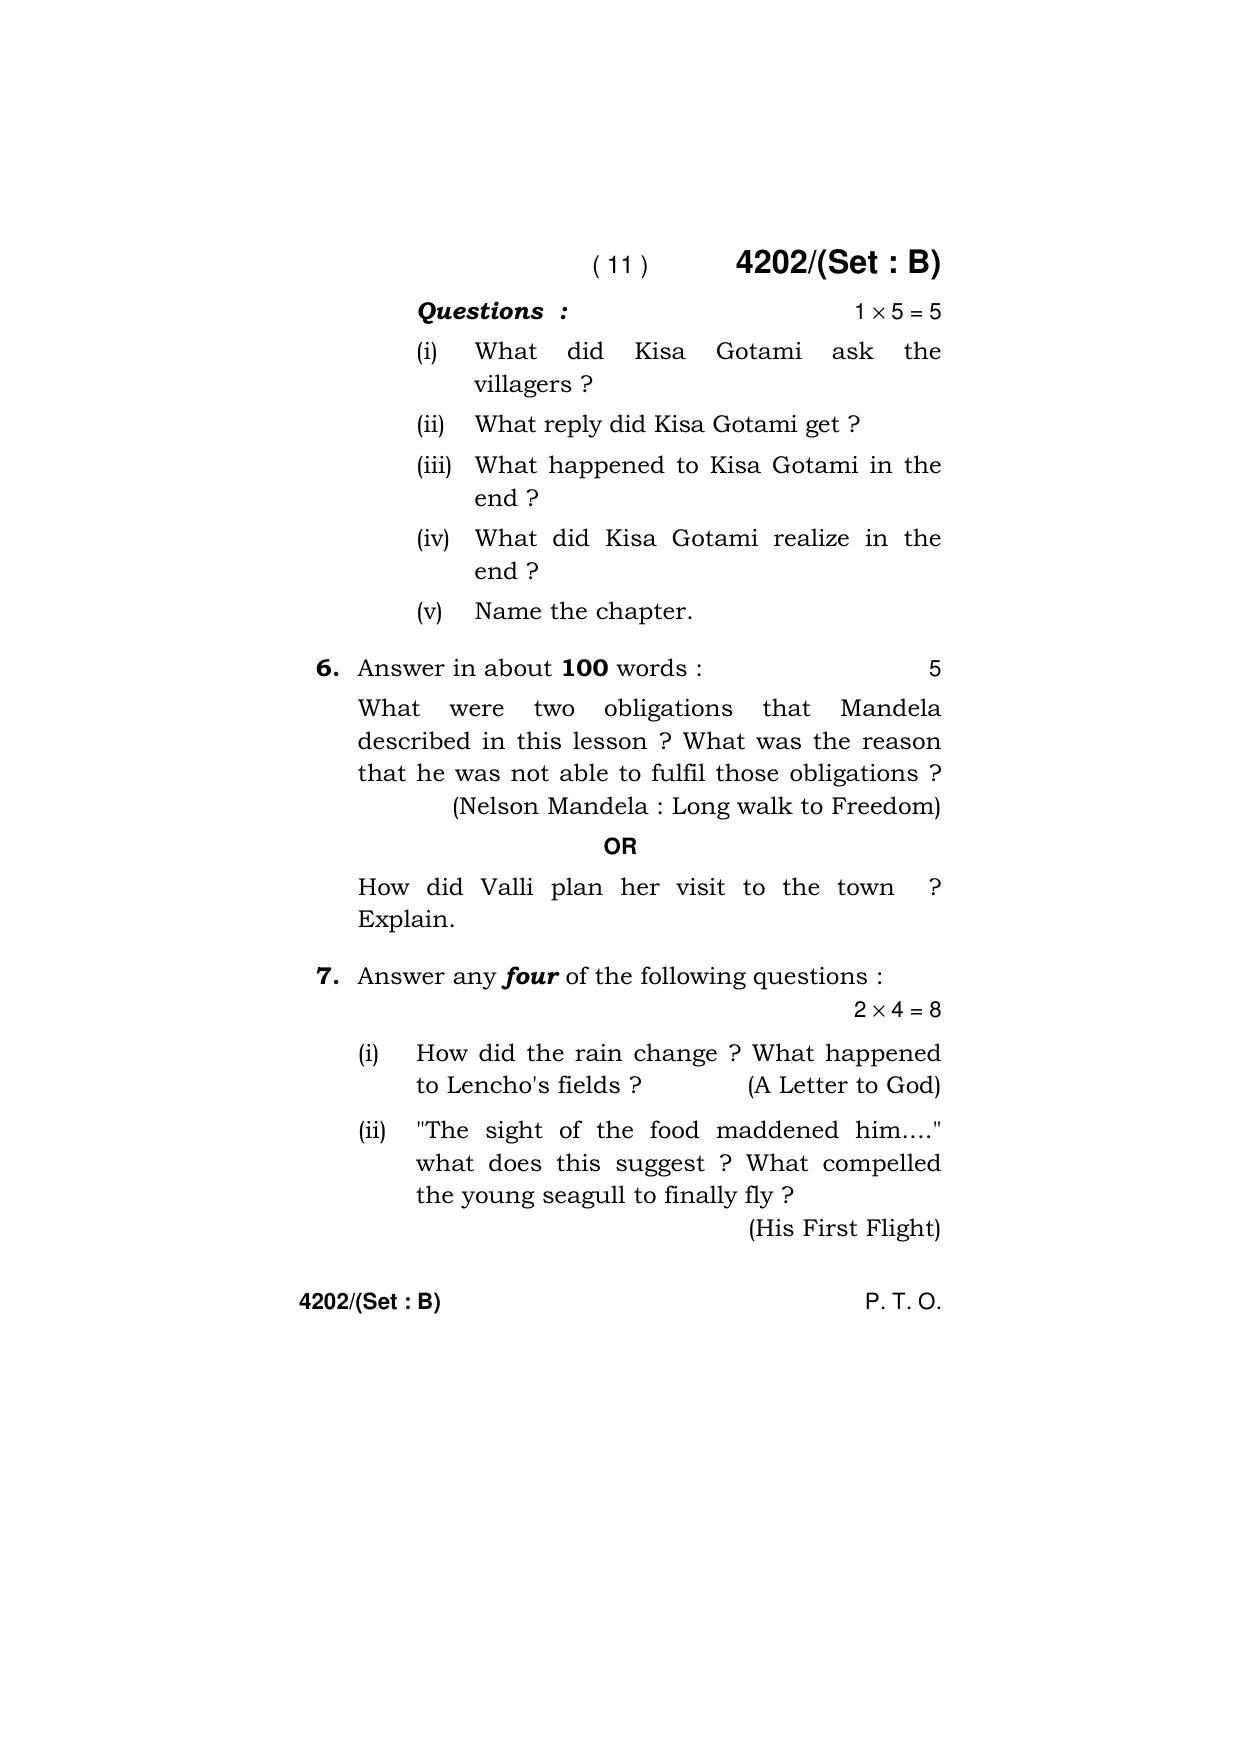 Haryana Board HBSE Class 10 English (All Set) 2019 Question Paper - Page 27